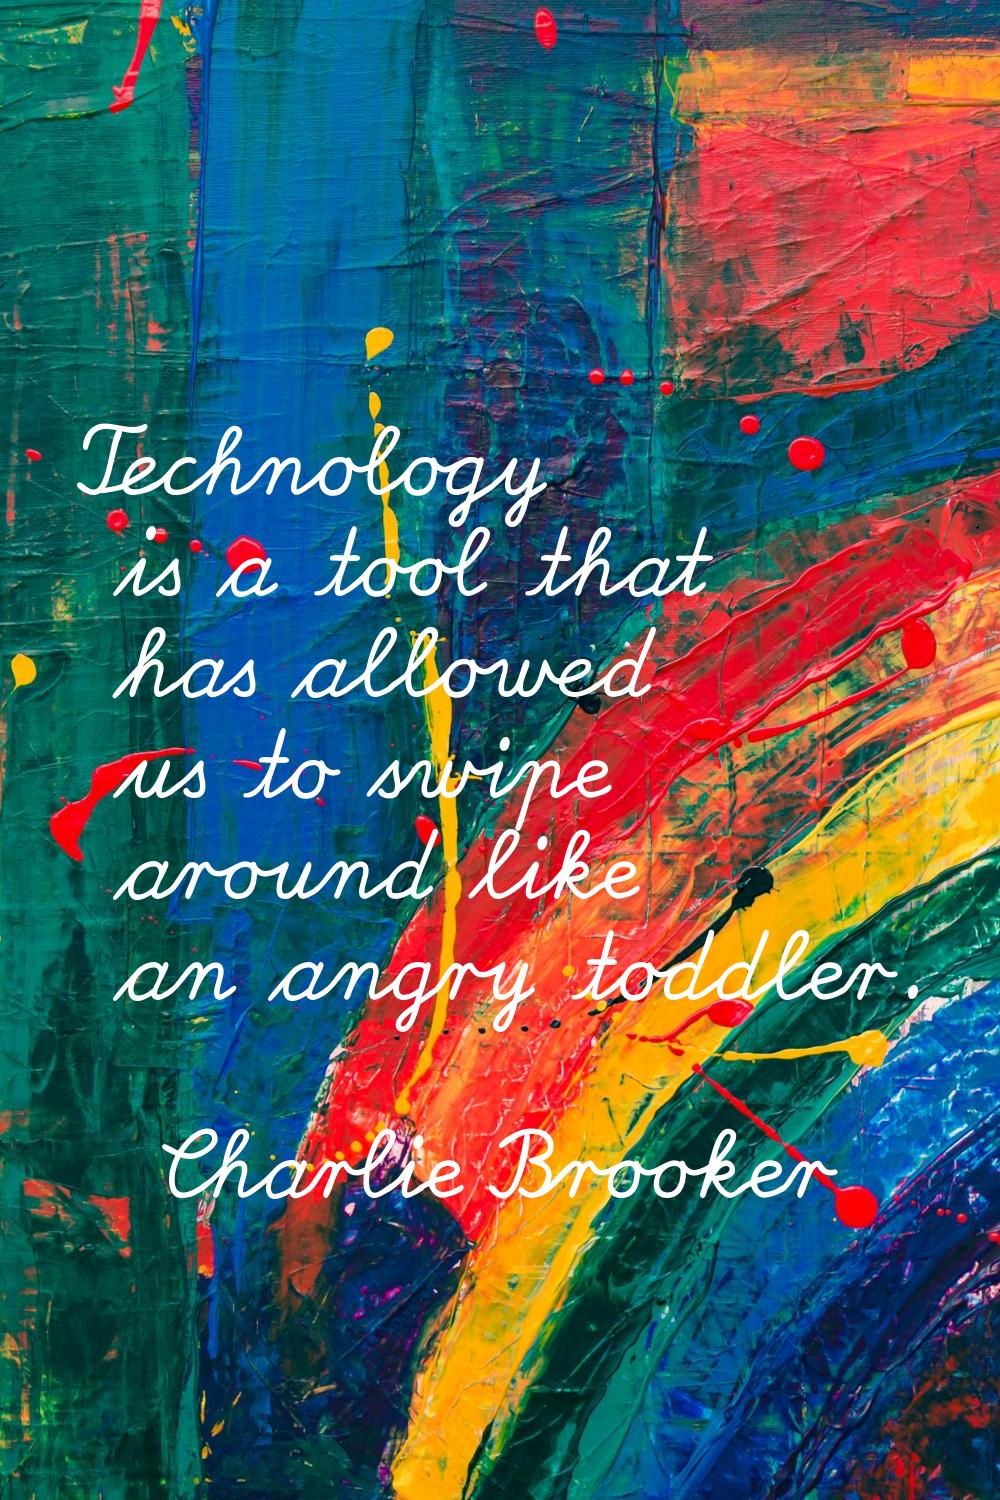 Technology is a tool that has allowed us to swipe around like an angry toddler.